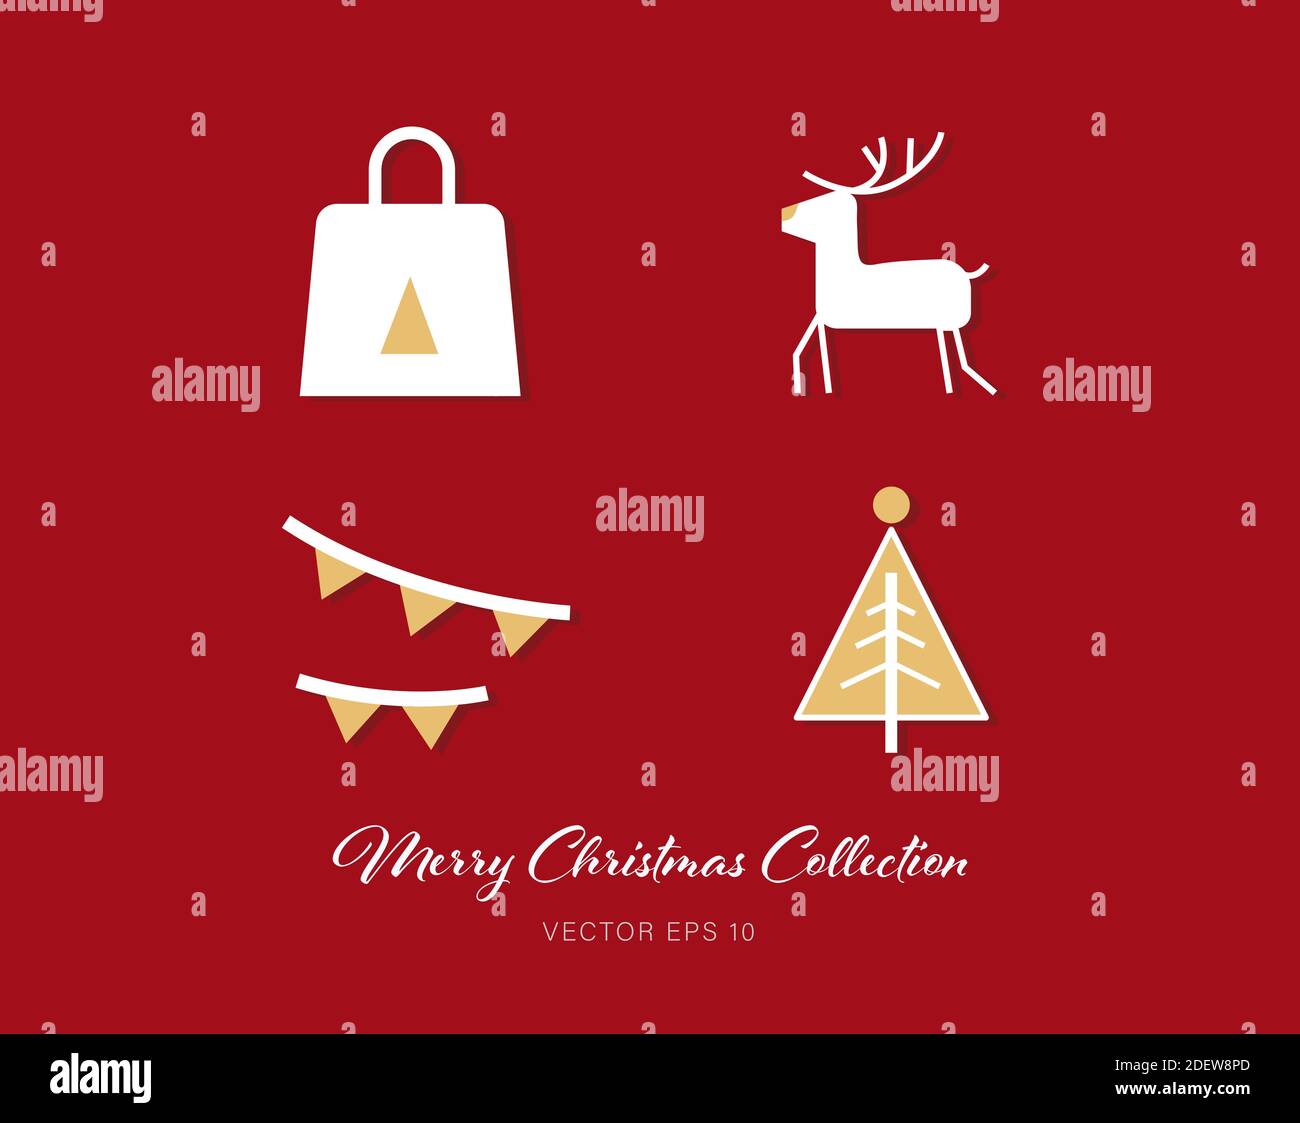 Beautiful white and gold theme Christmas flat icon set of 4 designs on red background Stock Vector